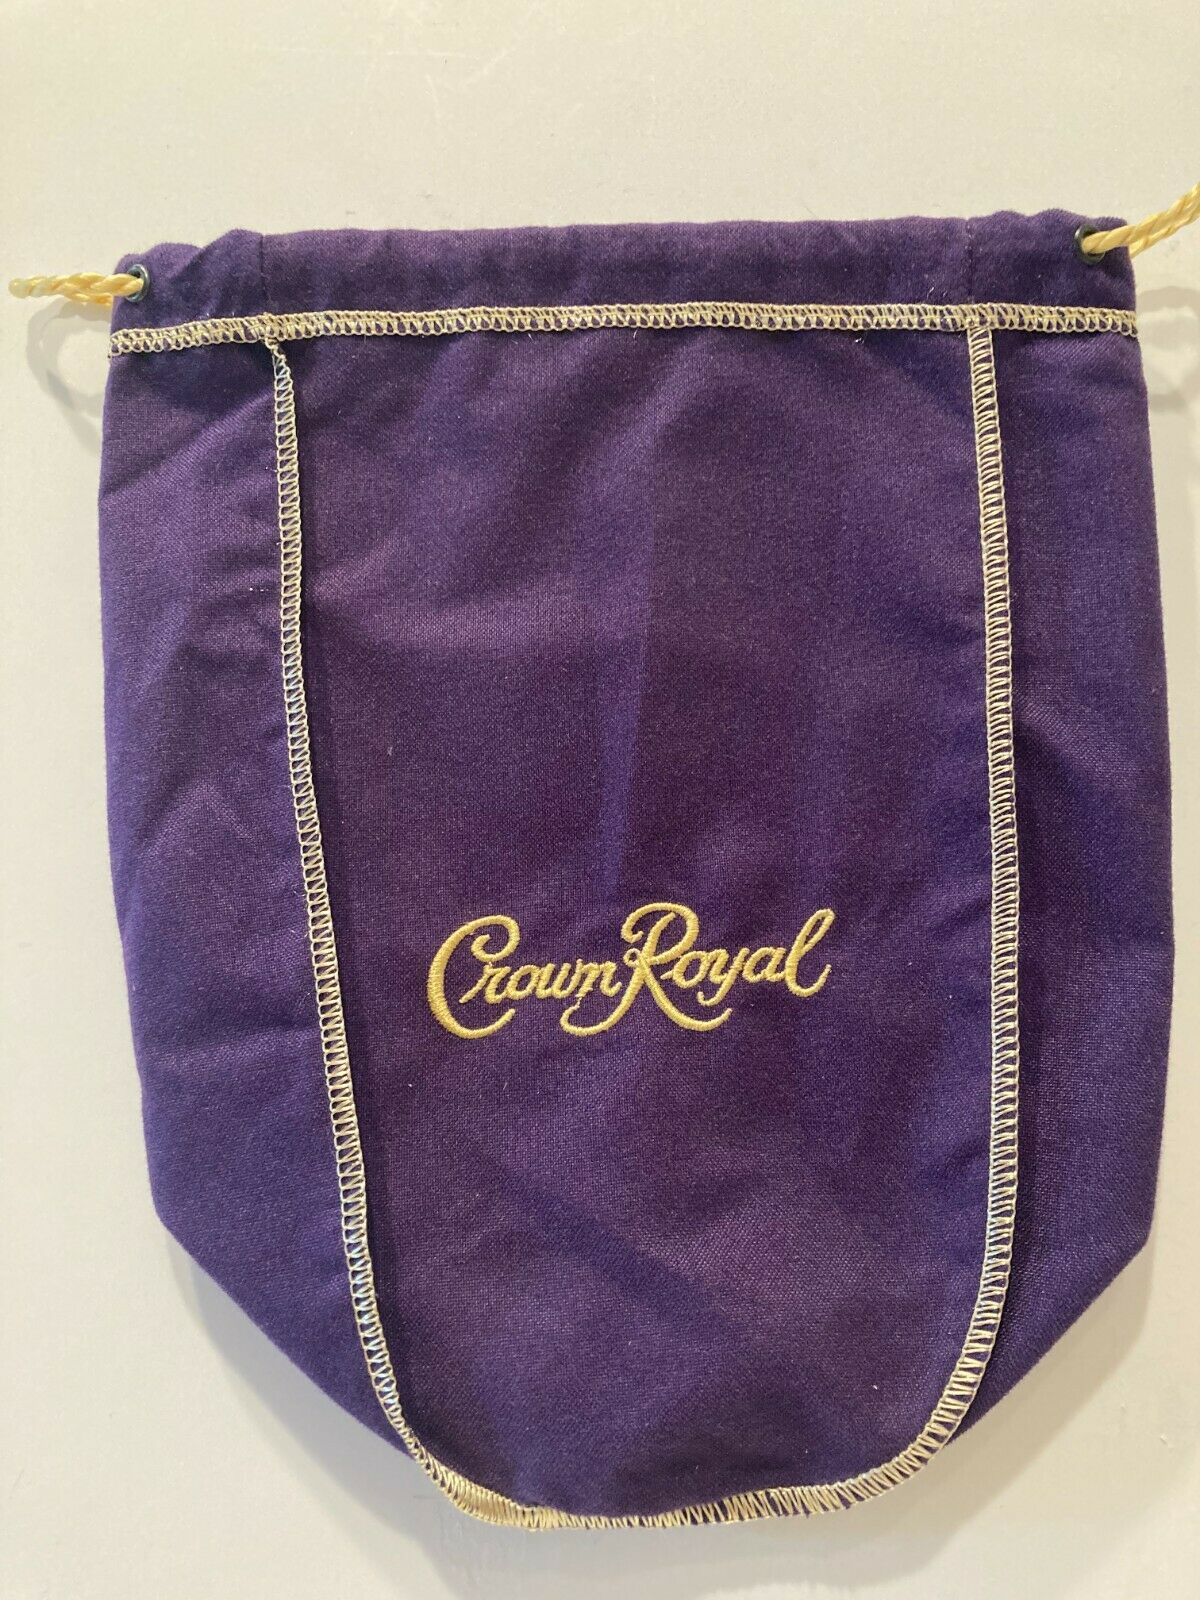 Crown Royal Purple Bag 9" With Draw String -  New